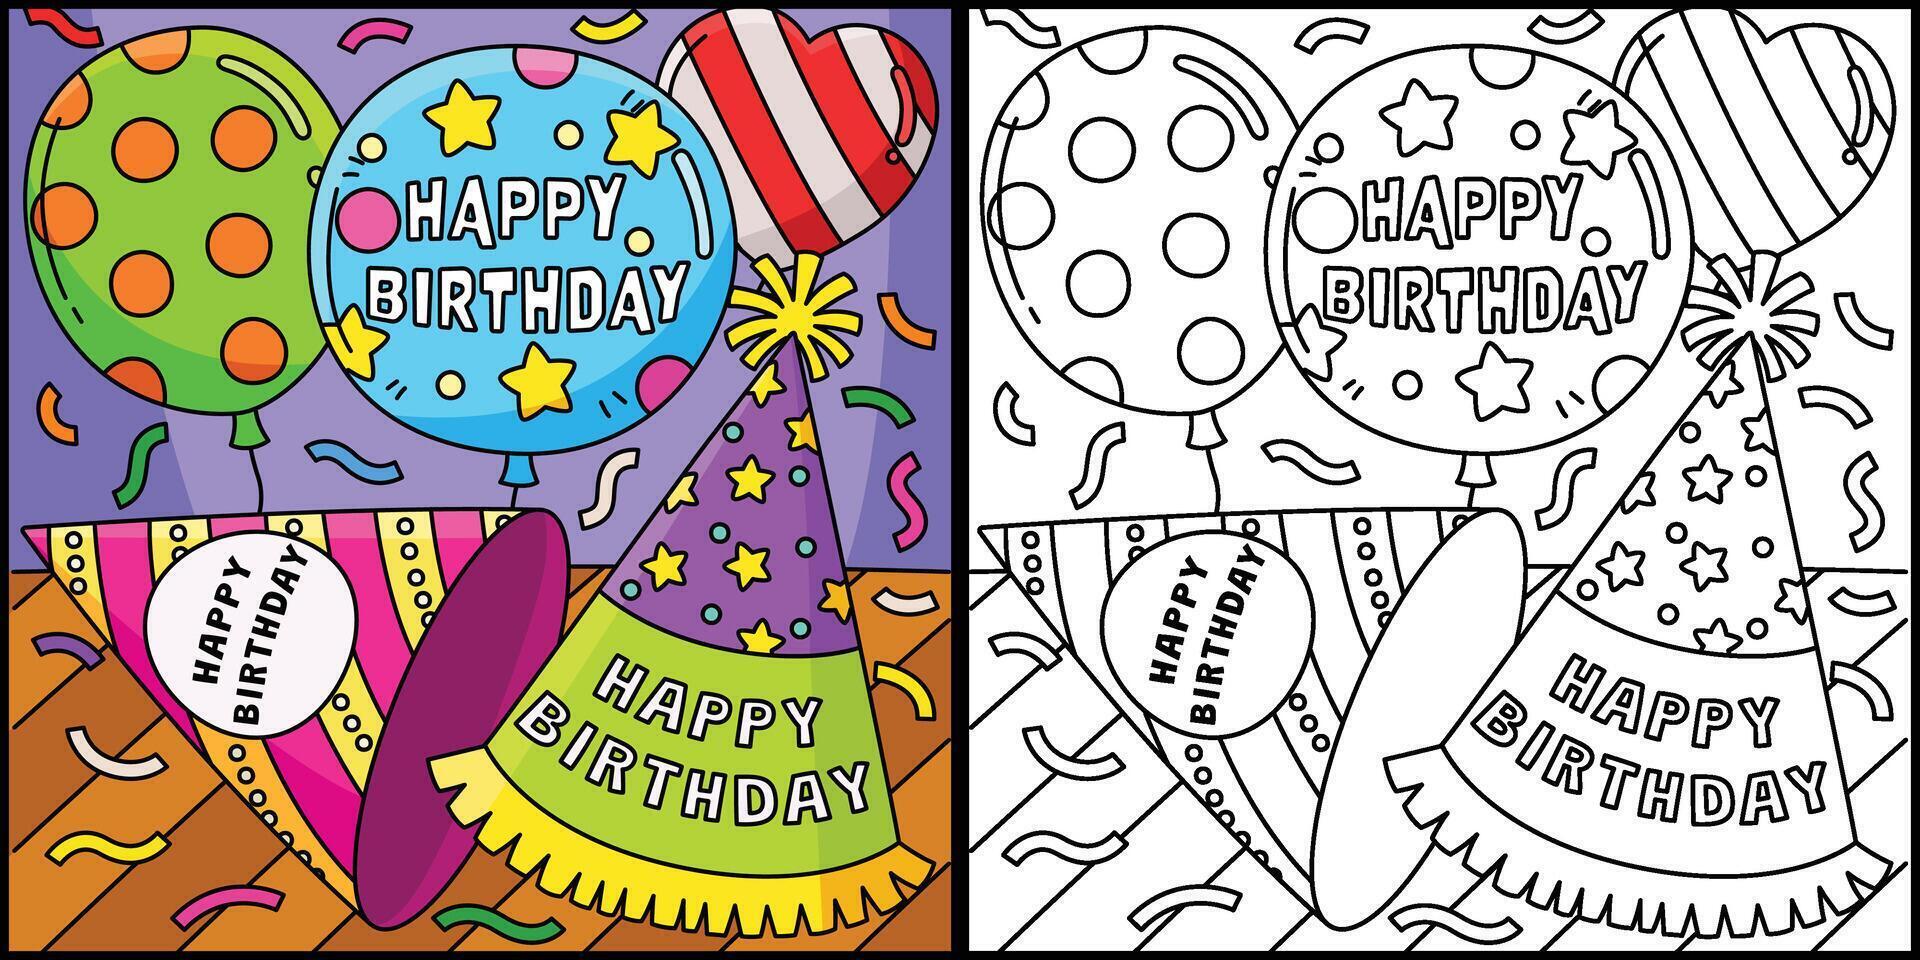 Birthday Party Hats and Balloons Illustration vector